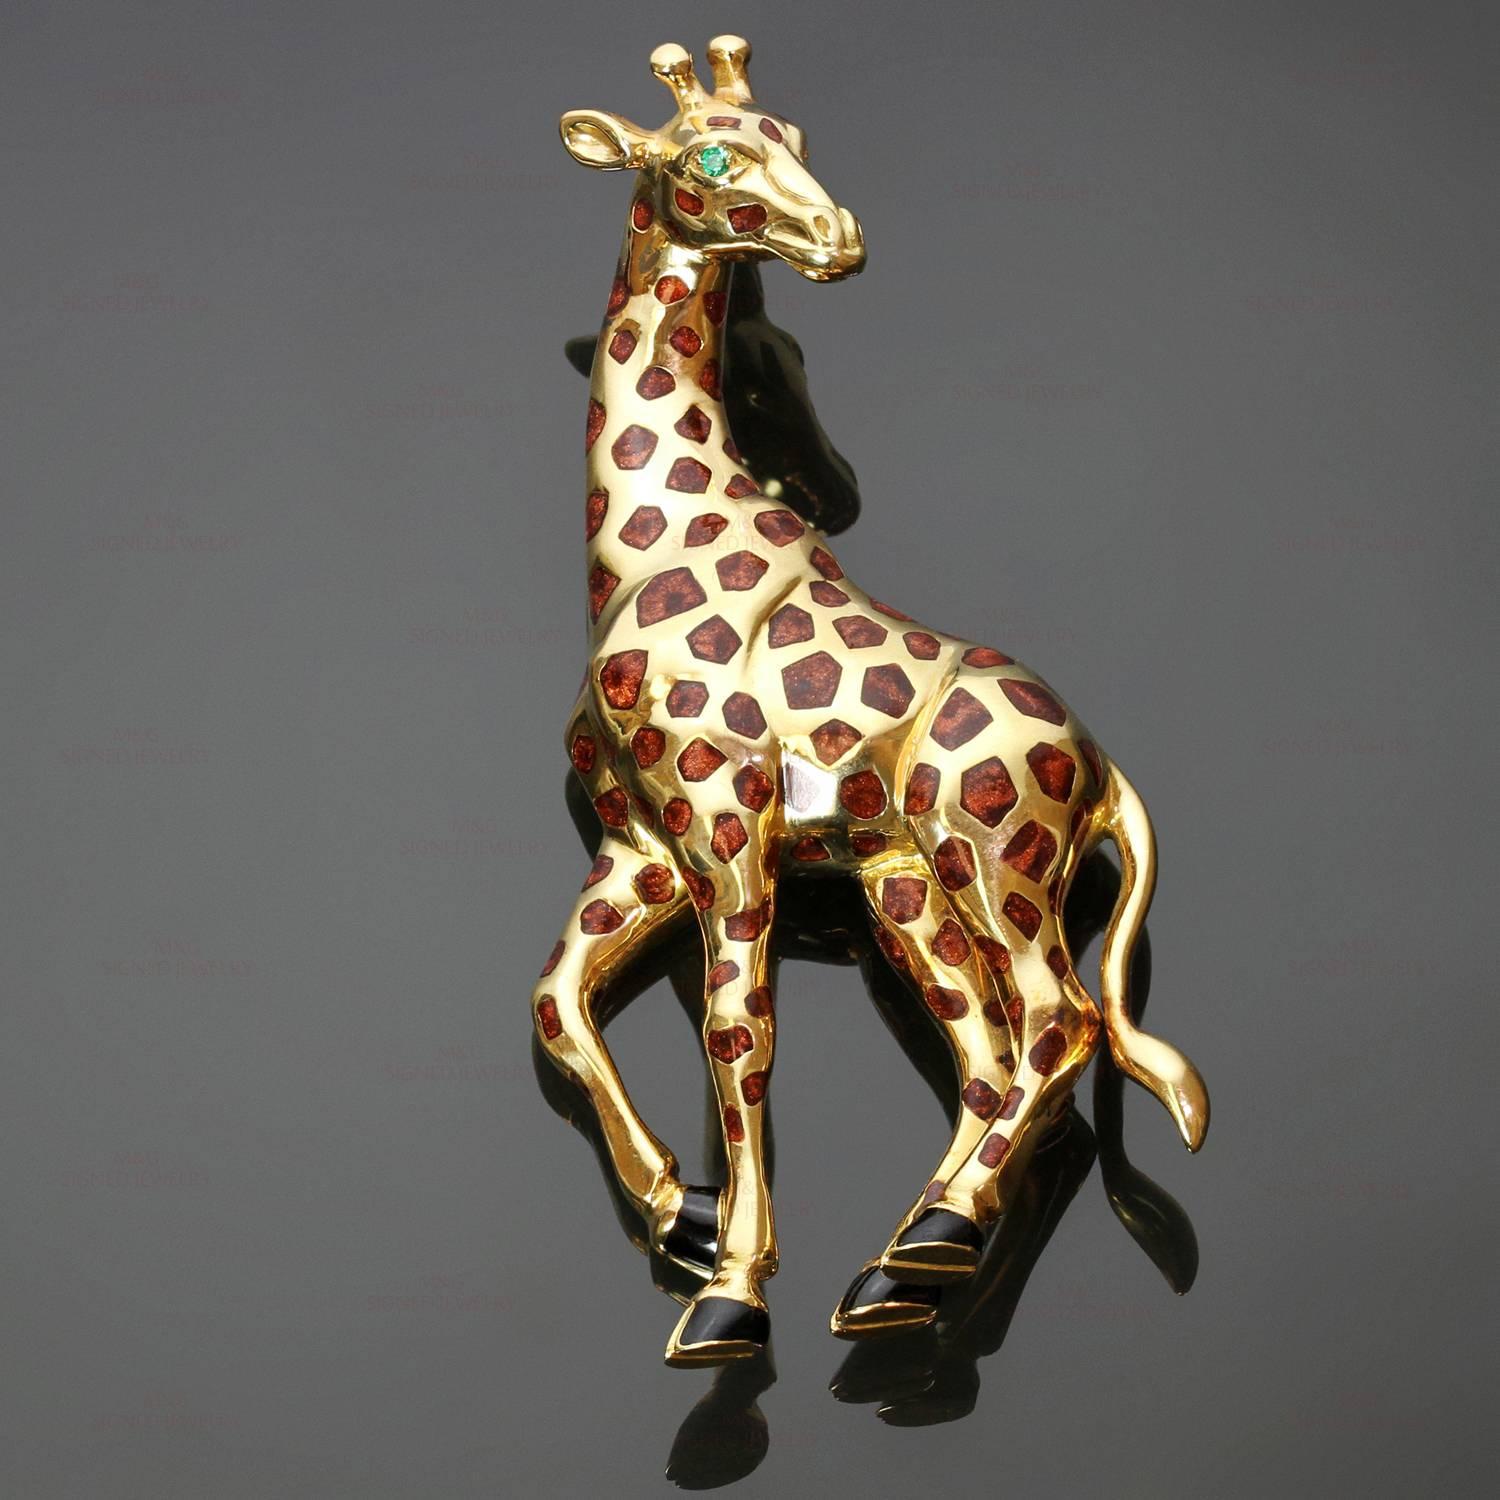 This fabulous Cartier brooch features a chic giraffe design crafted in 18k yellow gold and accented with emerald and enamel. Made in France circa 1980s. Measurements: 1.33" (34mm) width, 2.87" (73mm) length. 